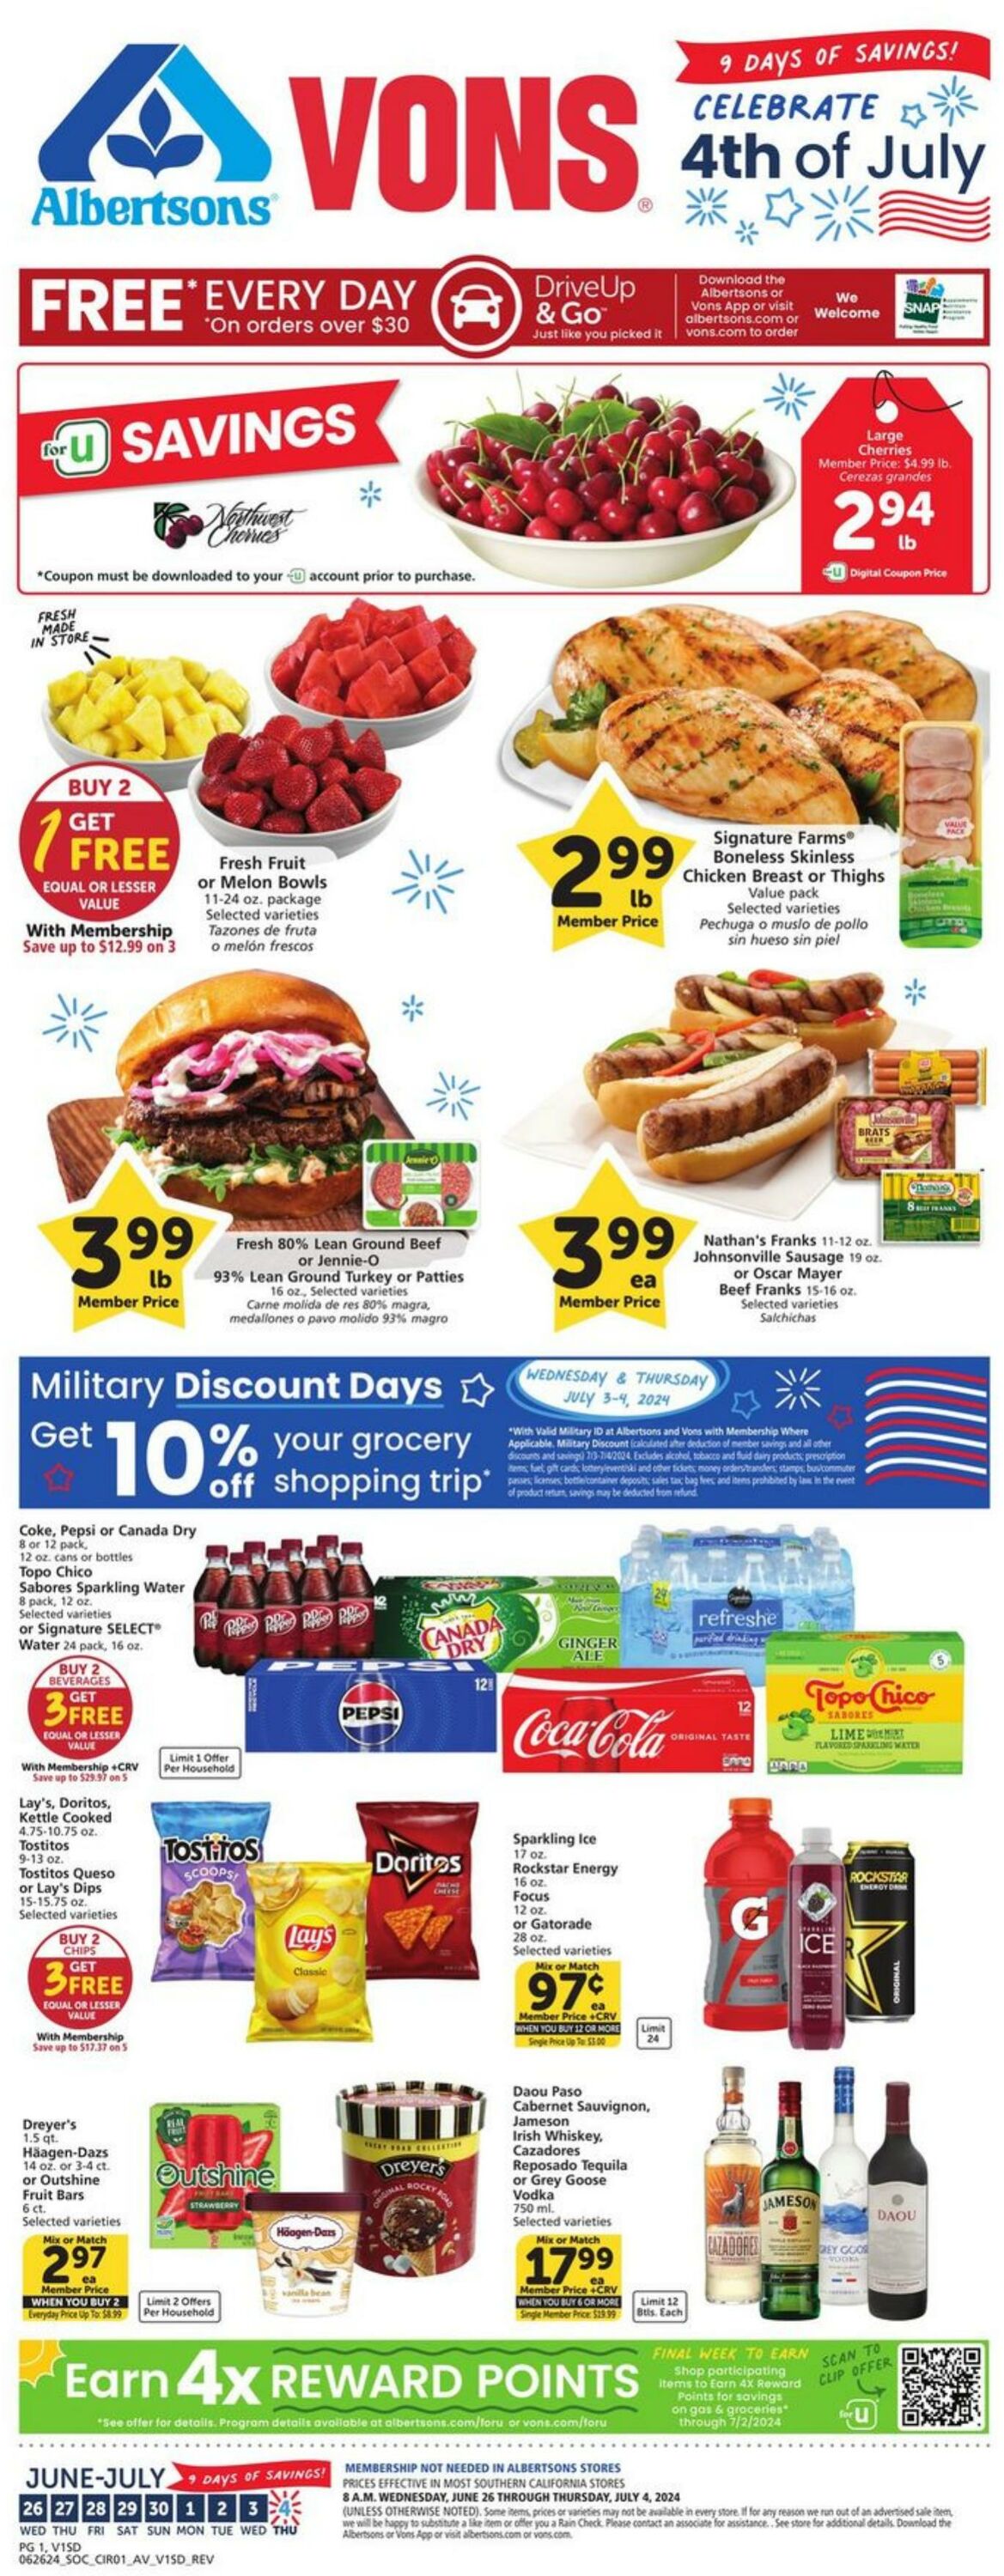 Vons weekly-ad